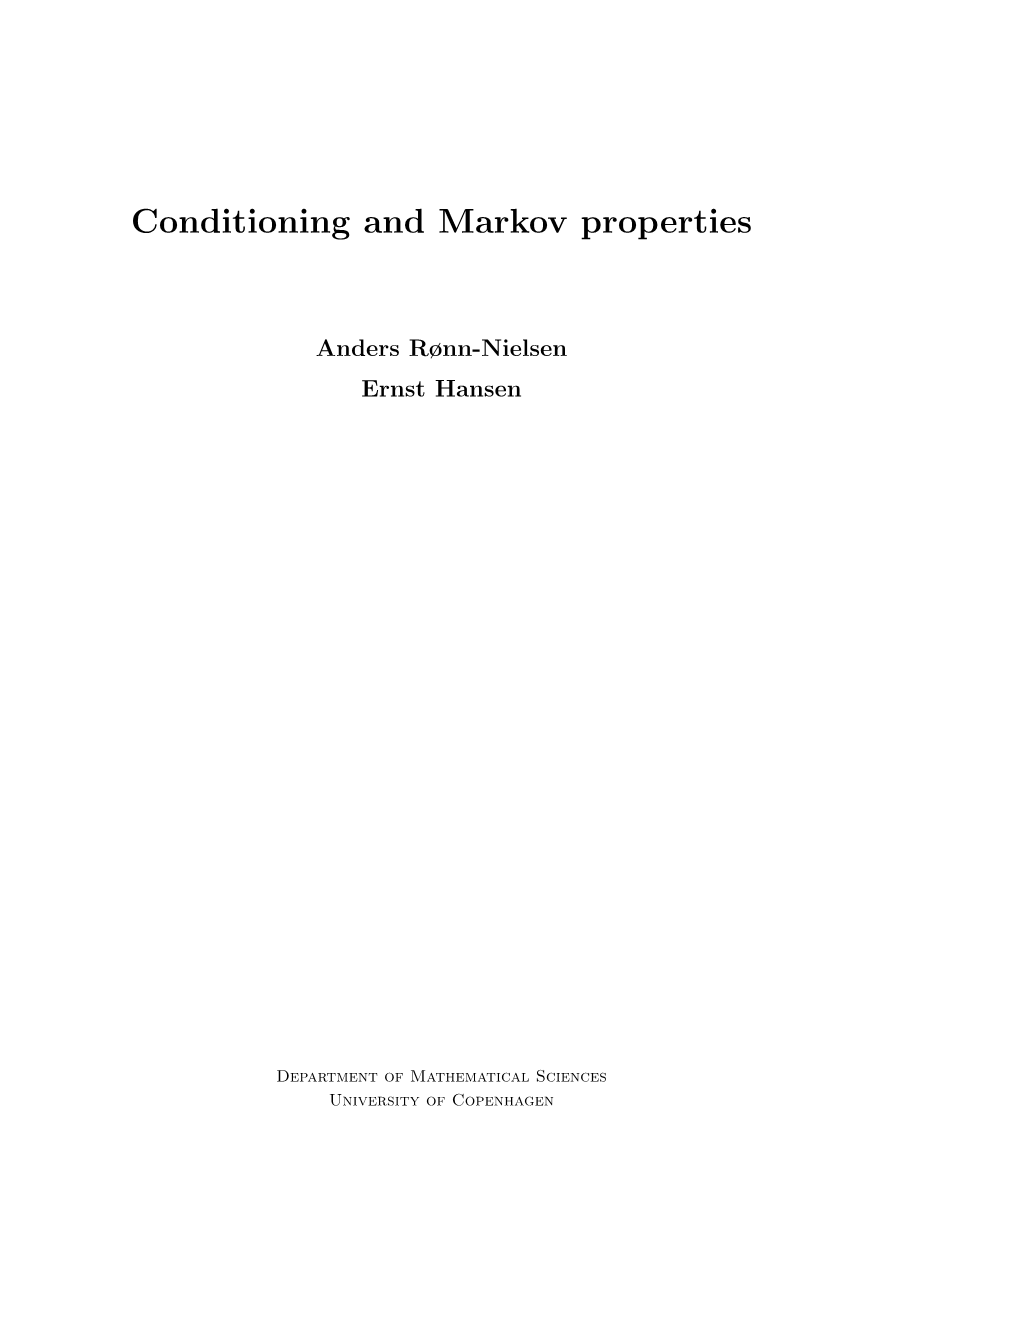 Conditioning and Markov Properties